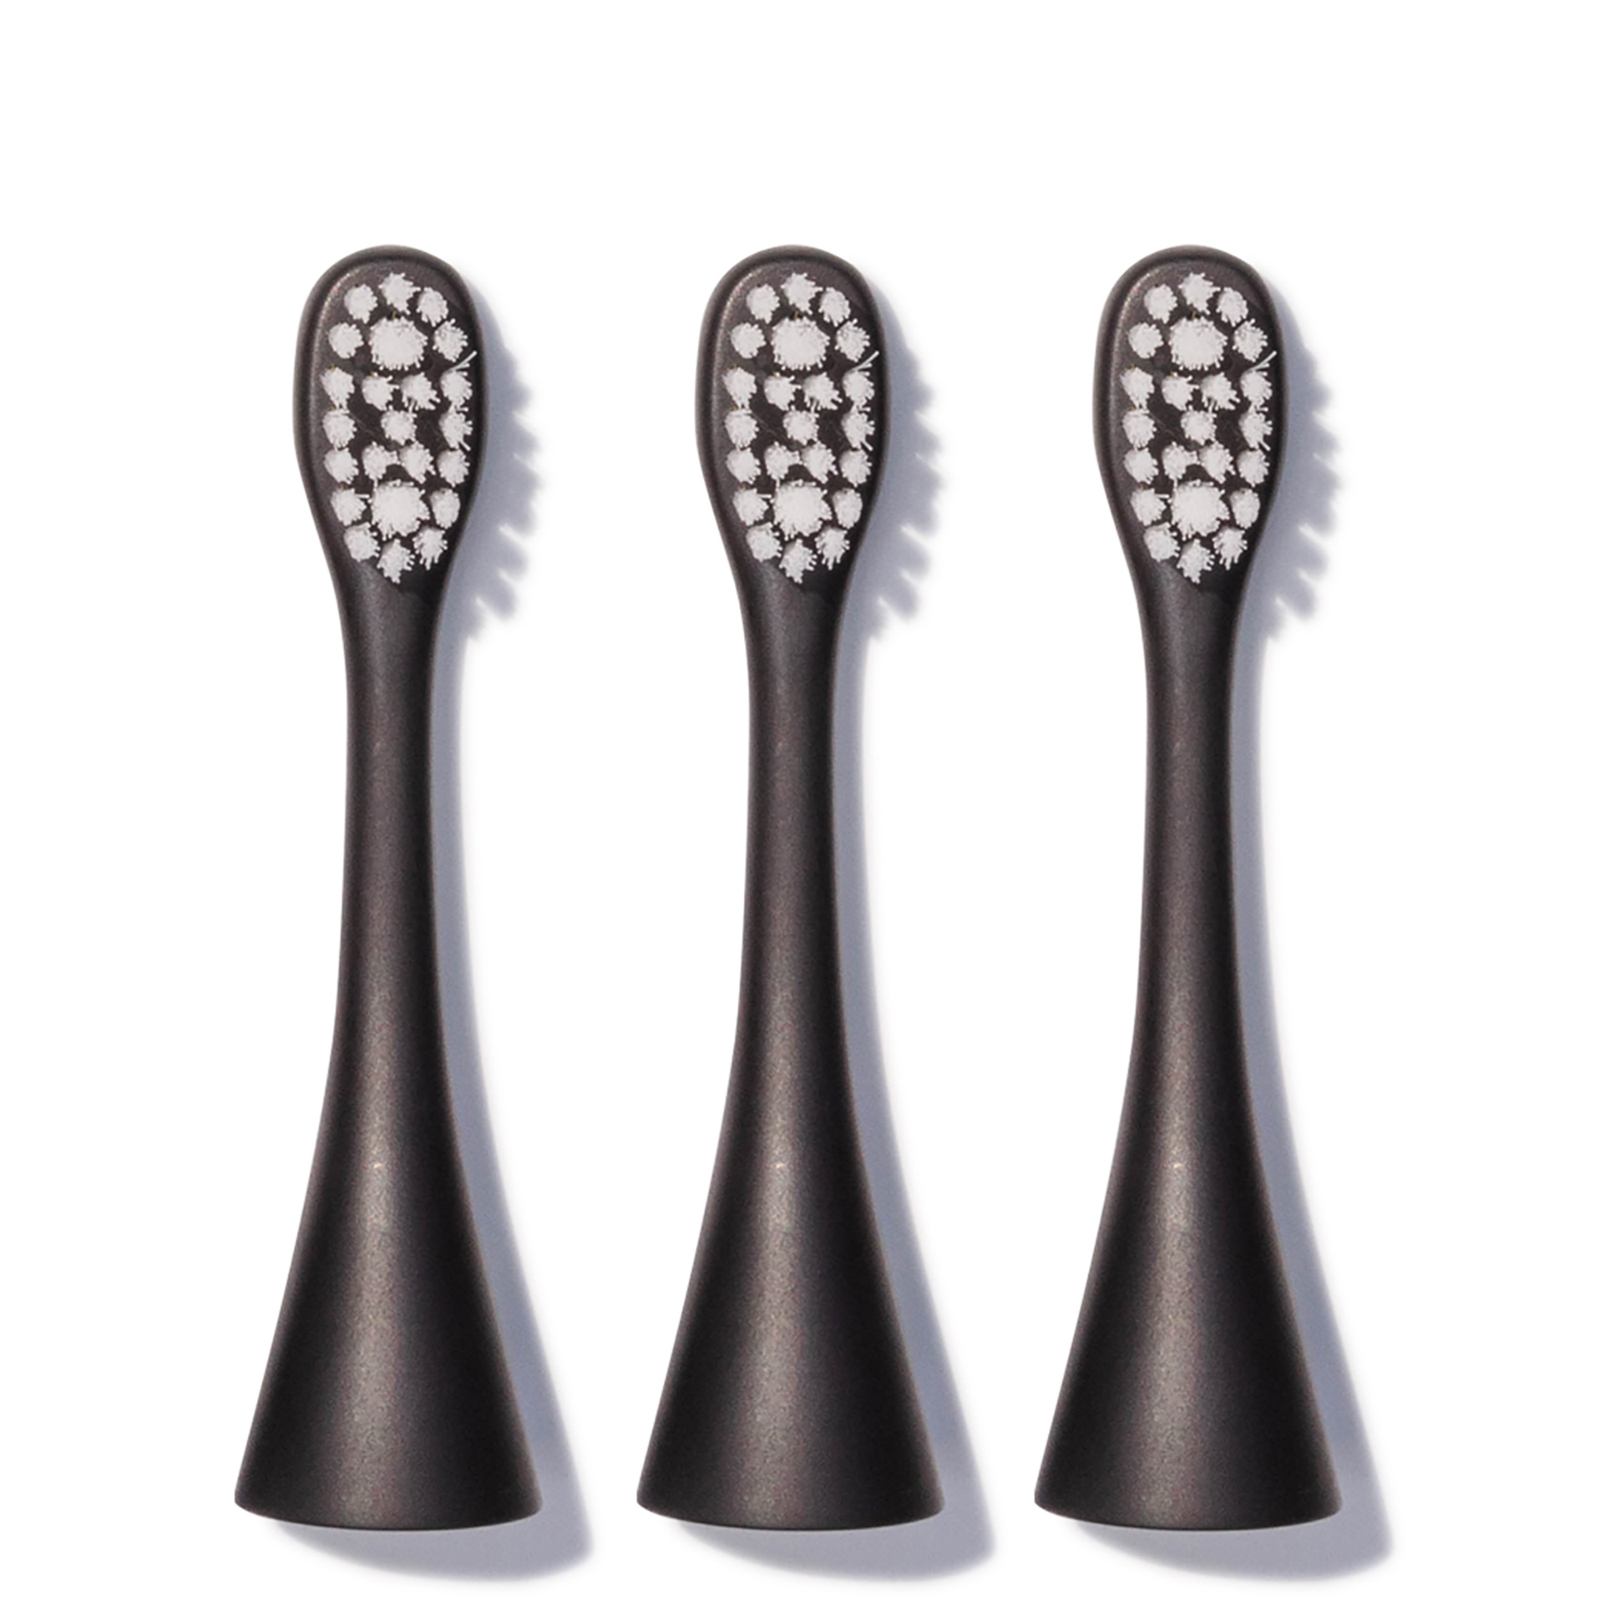 Spotlight Oral Care Sonic Pro Jet Black Replacement Heads